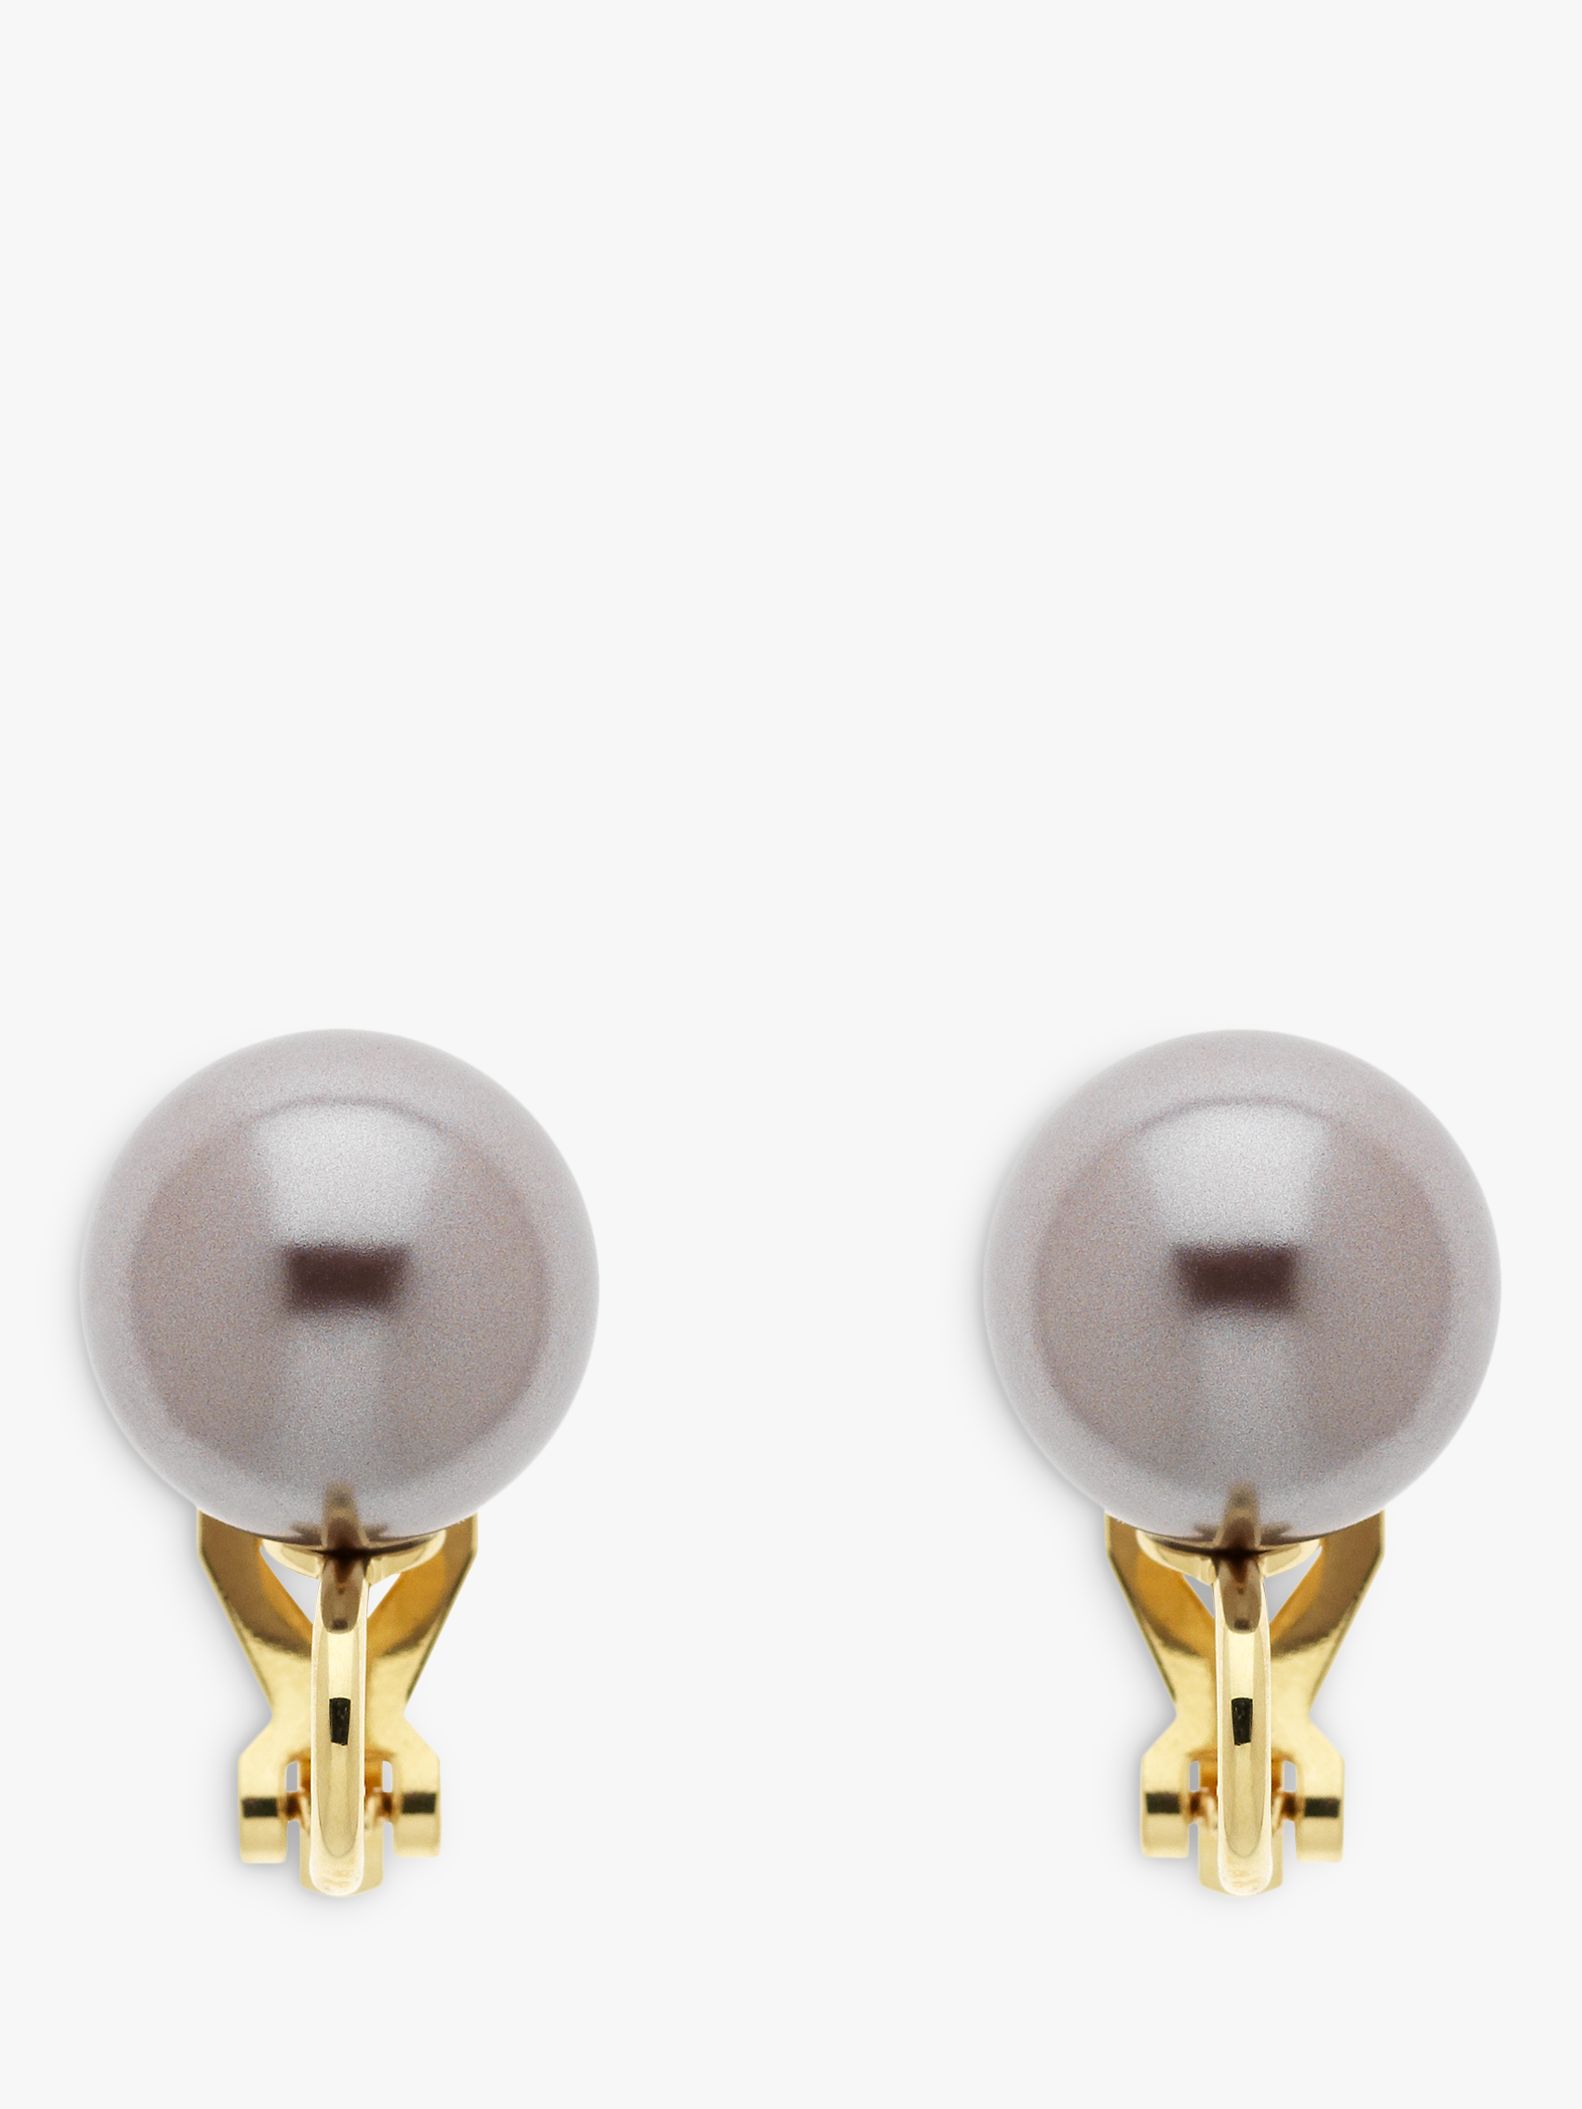 Emma Holland Faux Pearl Clip-On Stud Earrings, Gold/Brown